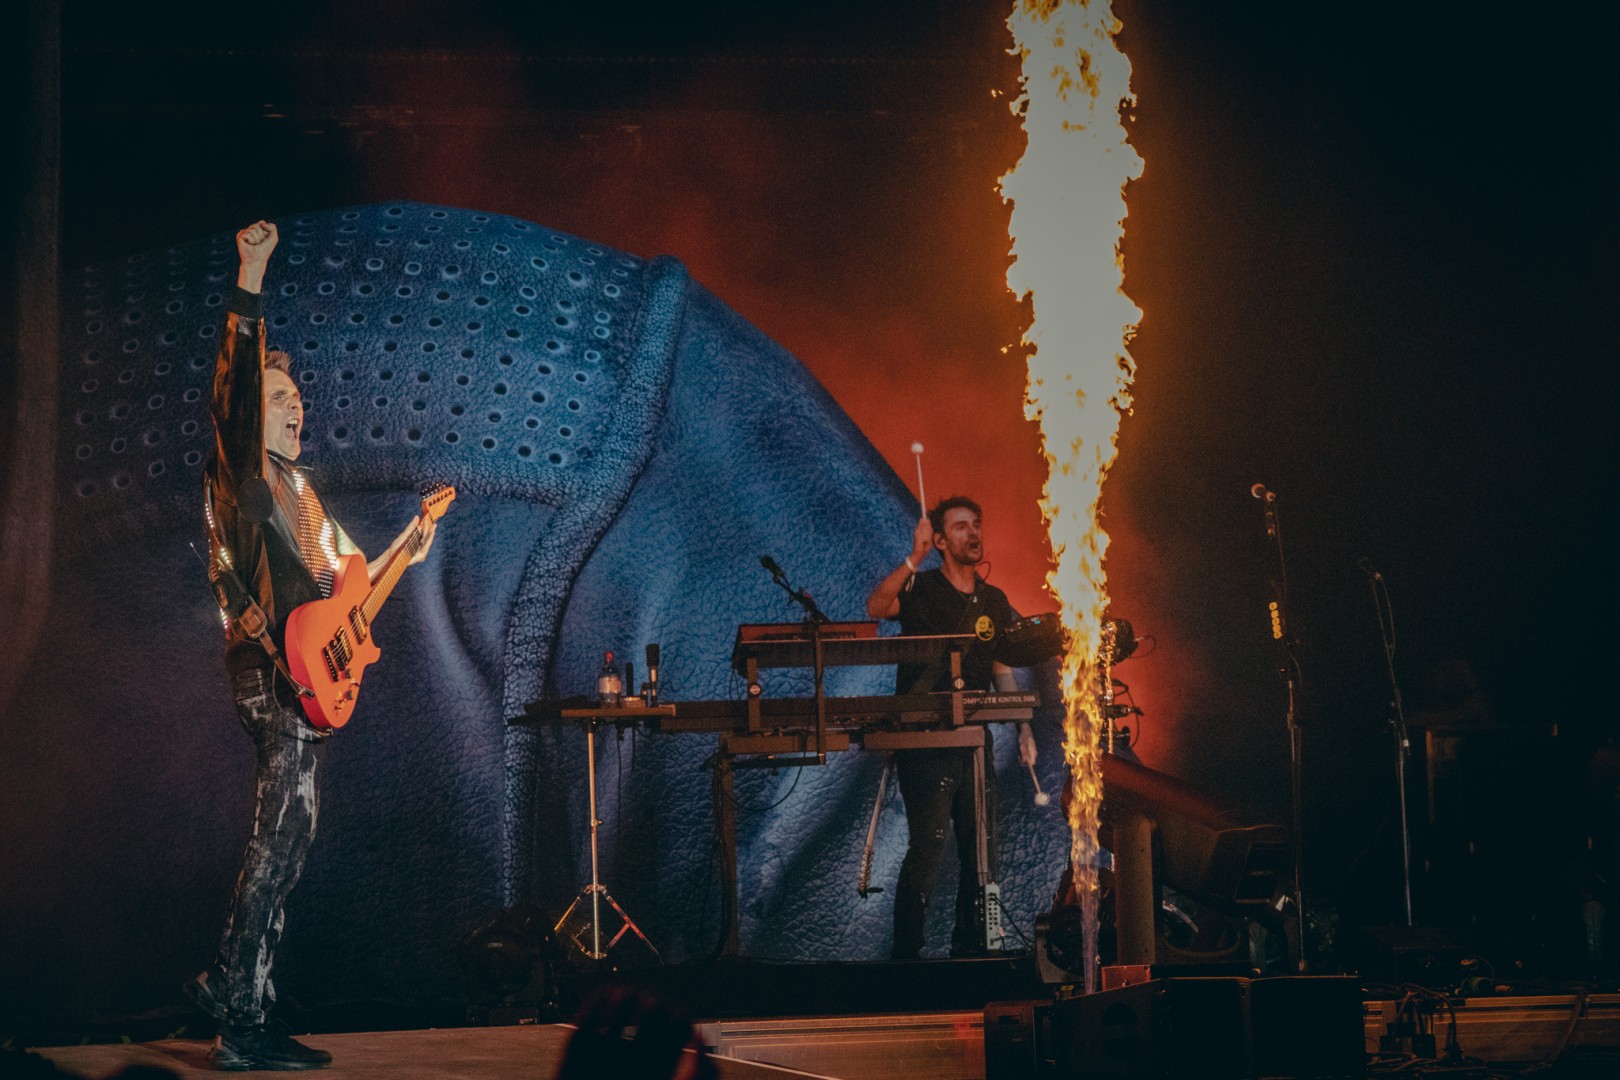 Muse in Madrid on July 8, 2022 (a1e6bd8882)